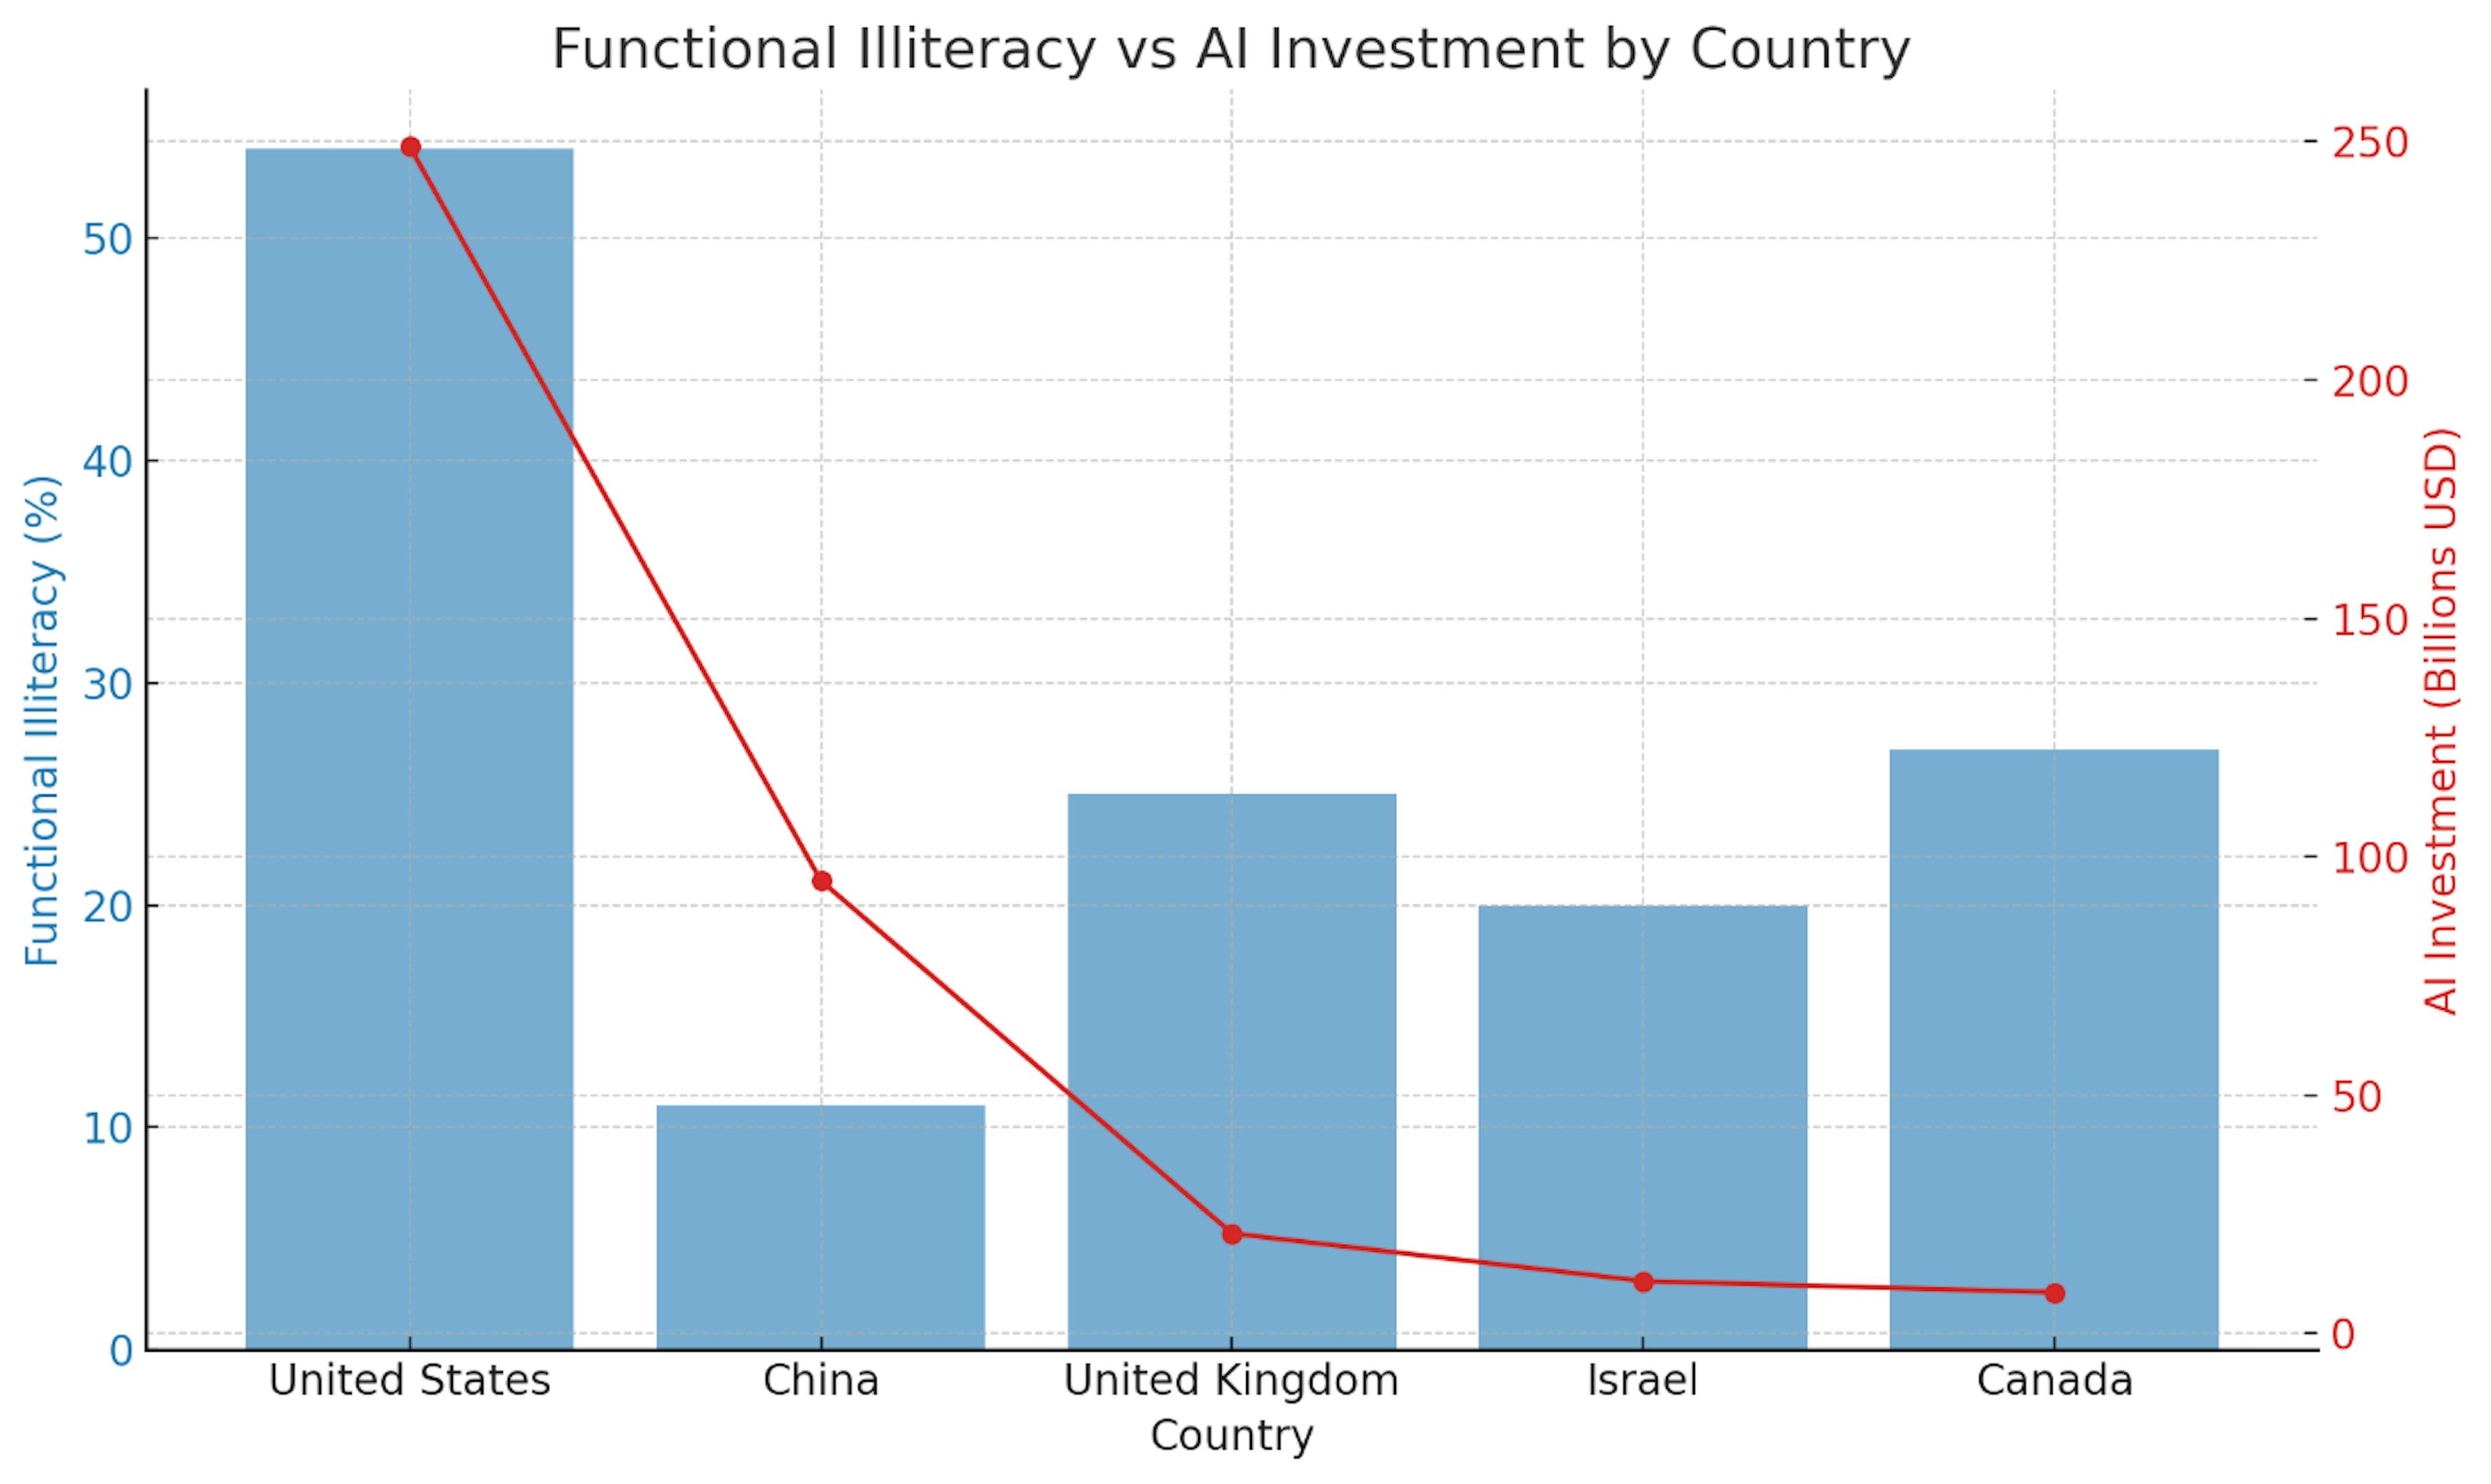 The bar chart represents the percentage of functional illiteracy, while the line chart shows AI investment in billions of USD for each country. This visualization highlights the relationship between literacy rates and AI investment, offering insights into the potential job displacement risks due to AI advancements. Countries with higher AI investments and significant rates of functional illiteracy may face greater challenges as AI technologies continue to automate tasks traditionally performed by low-skill workers.